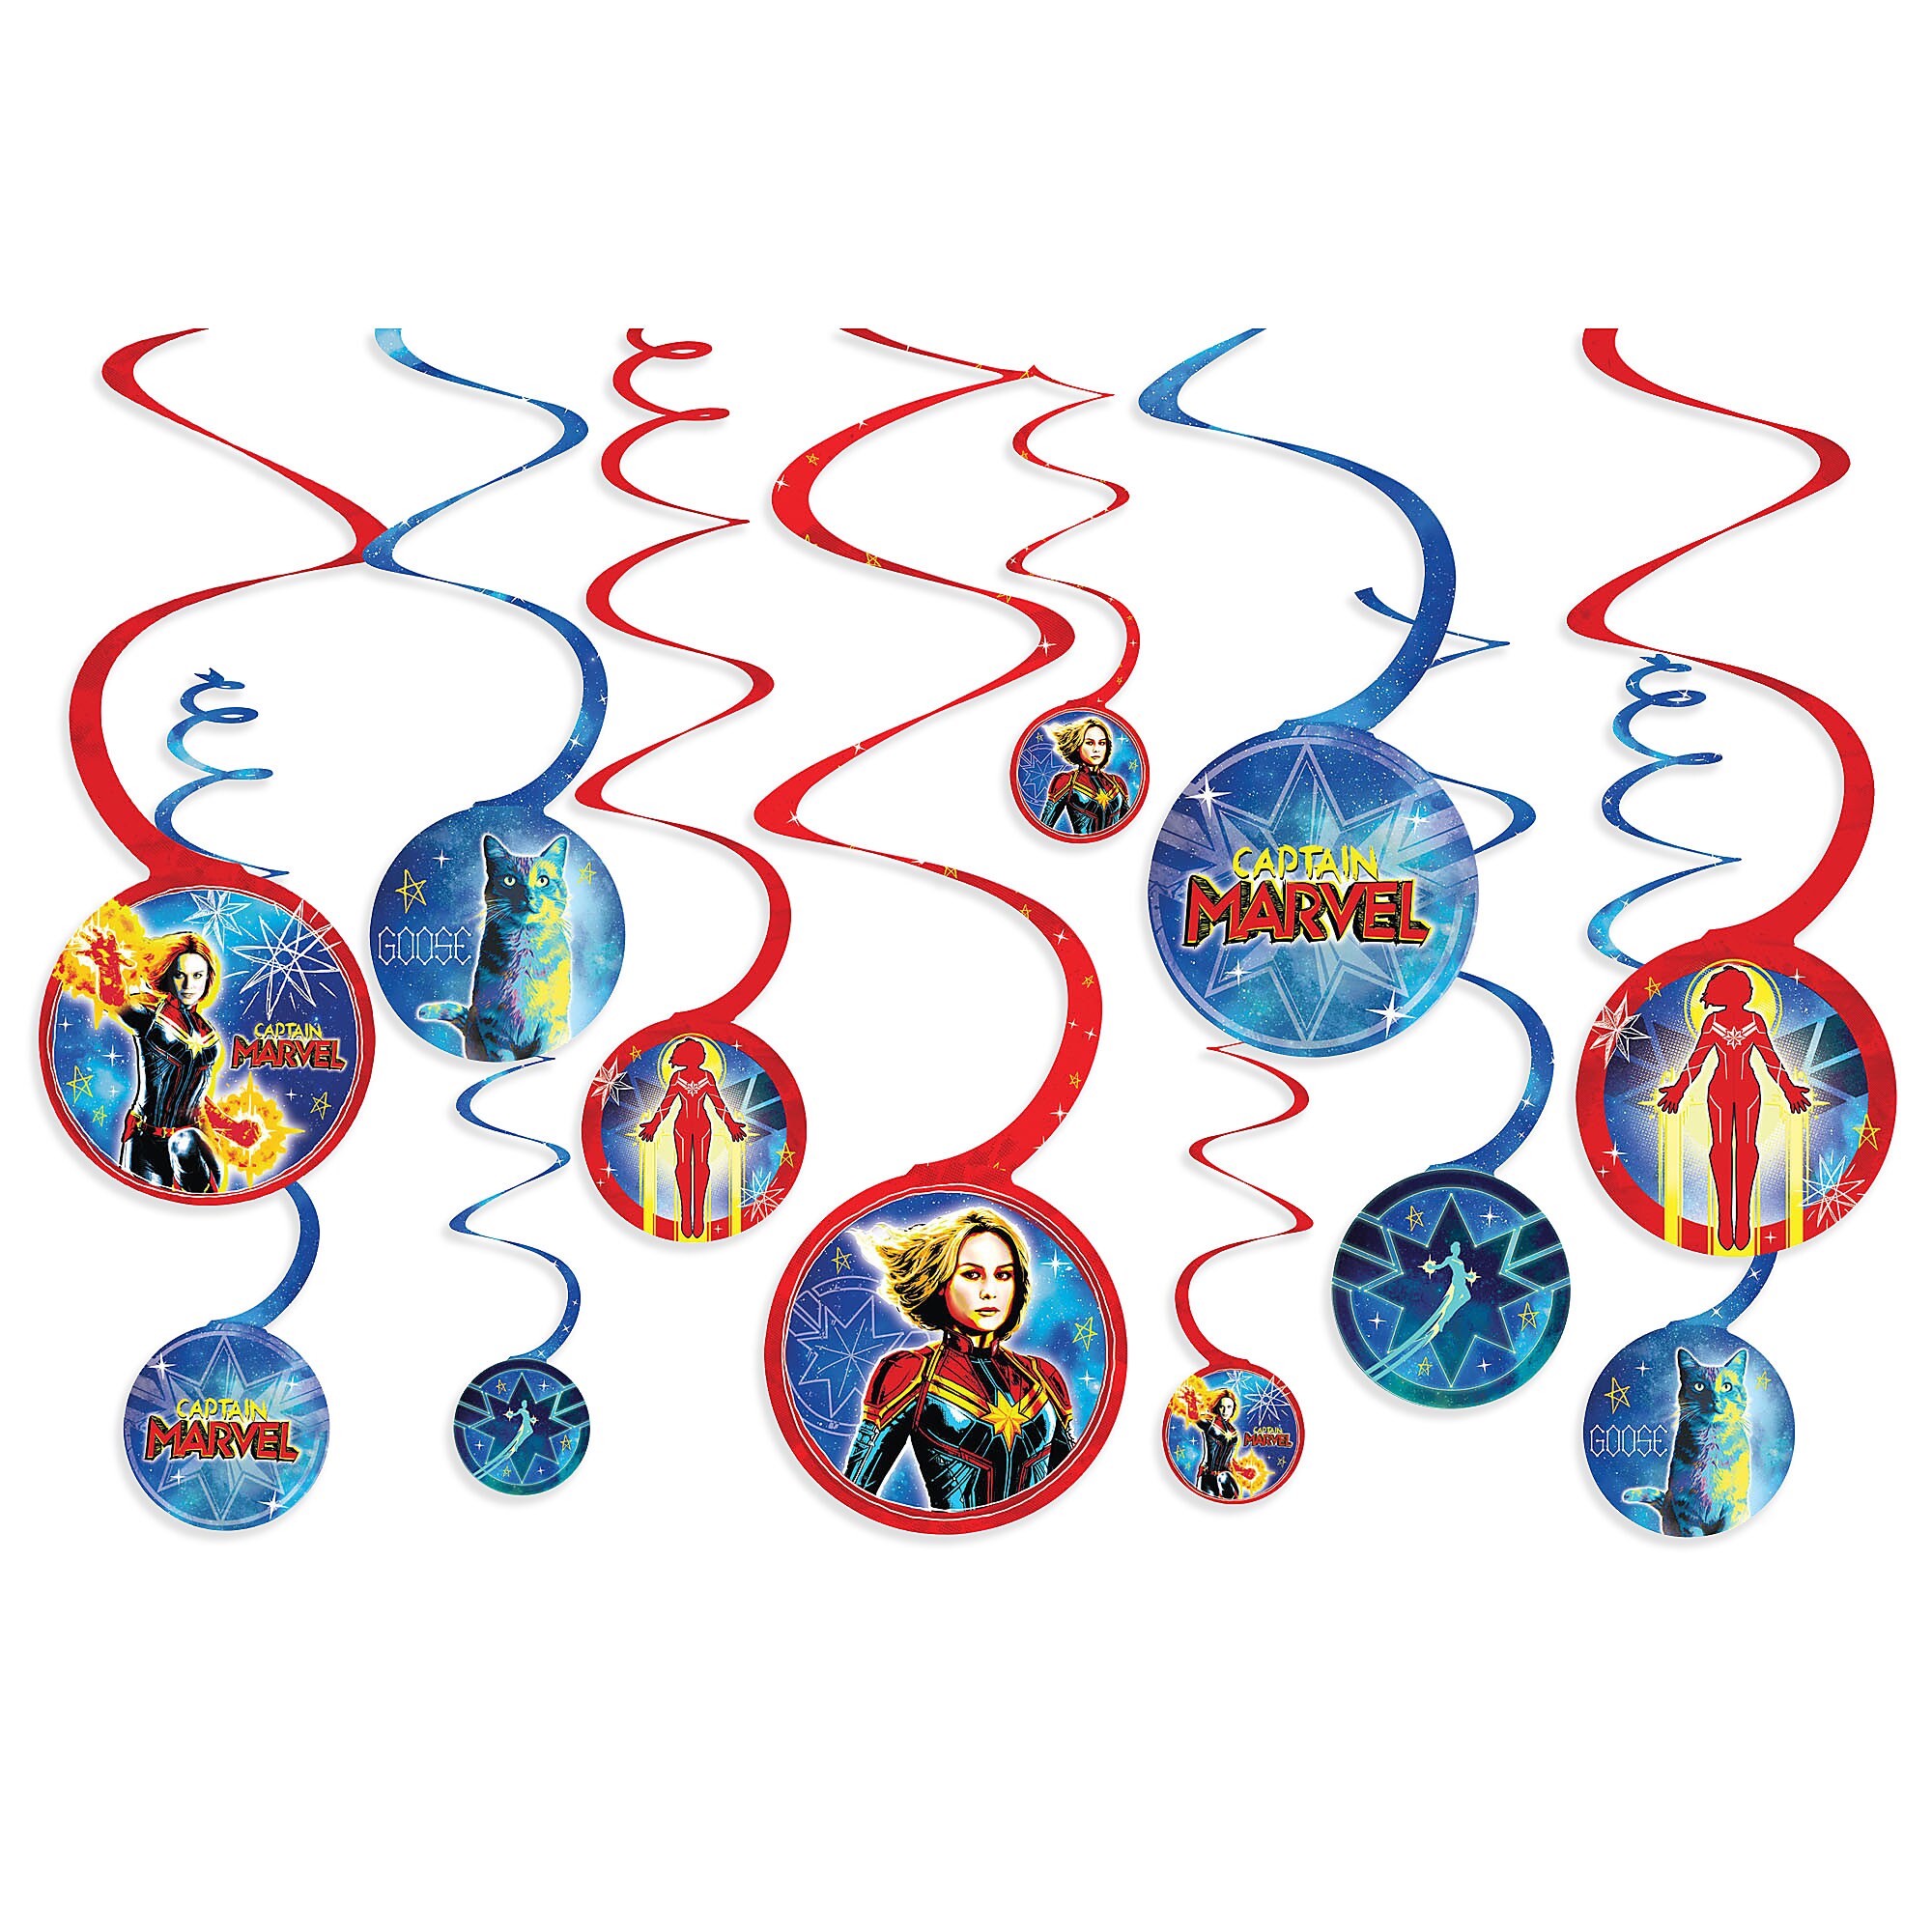 Marvel's Captain Marvel Spiral Party Decorations